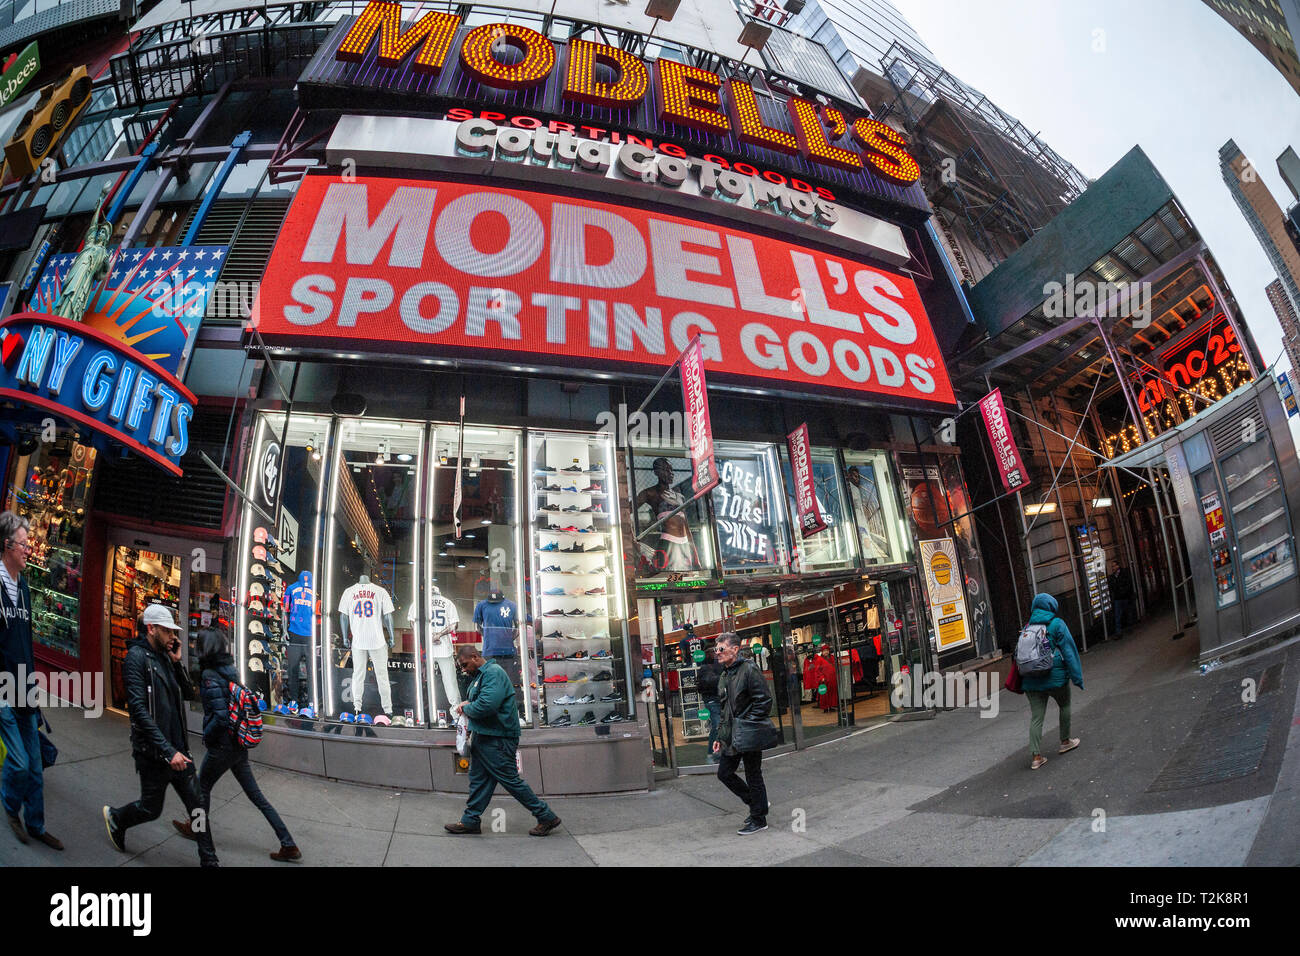 The Times Square location of the family-owned sporting goods chain, Modell's is seen in New York on Friday, March 29, 2019. Facing pressure from online and big box retailers Modell's Sporting Goods is reported to have hired an adviser on restructuring and a possible bankruptcy. (Â© Richard B. Levine) Stock Photo